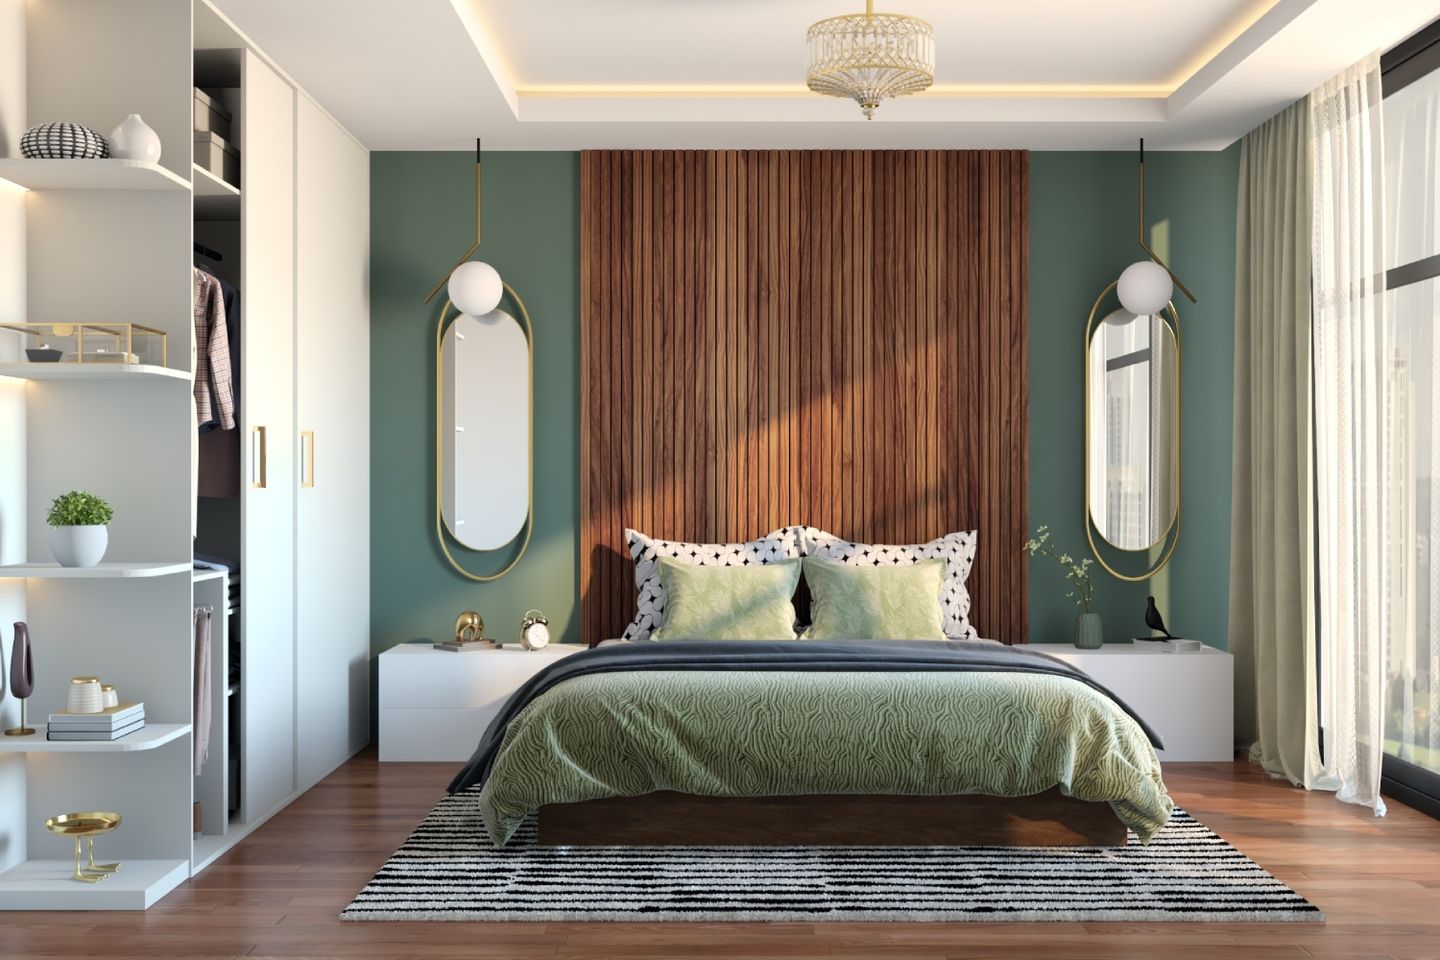 Contemporary Master Bedroom Design With Dark Green Accent Wall And Wooden Fluted Panels - Livspace